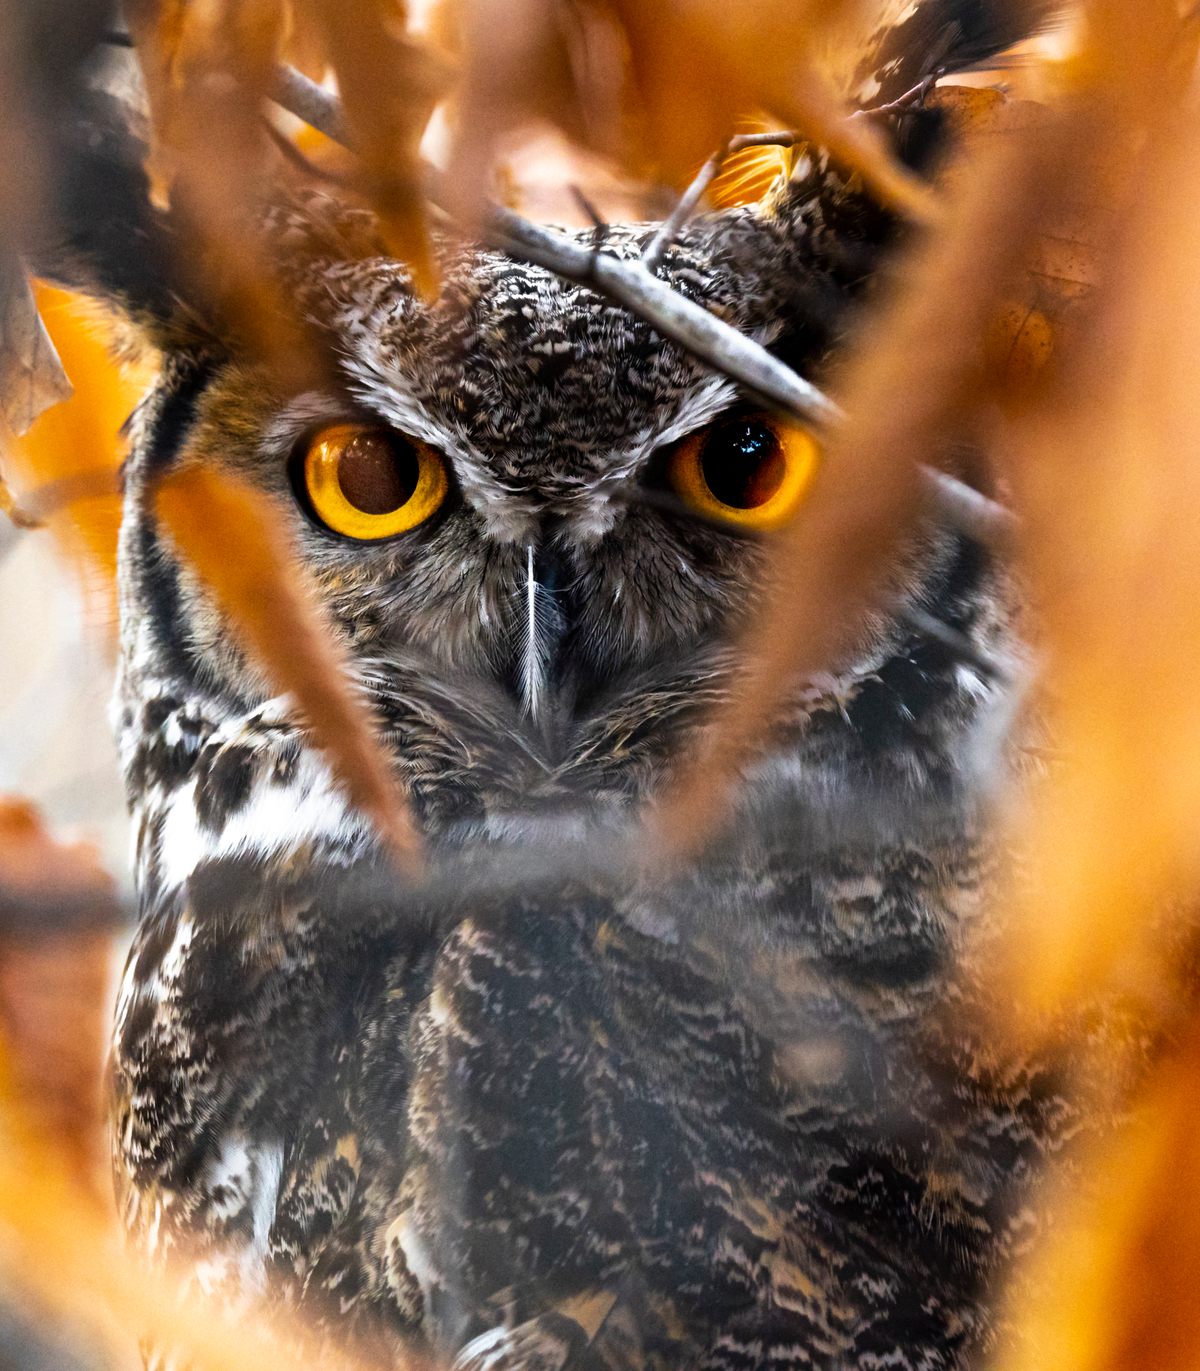 Mike Bellush's photograph of an owl at Turtle Back Zoo, in West Orange, New Jersey.